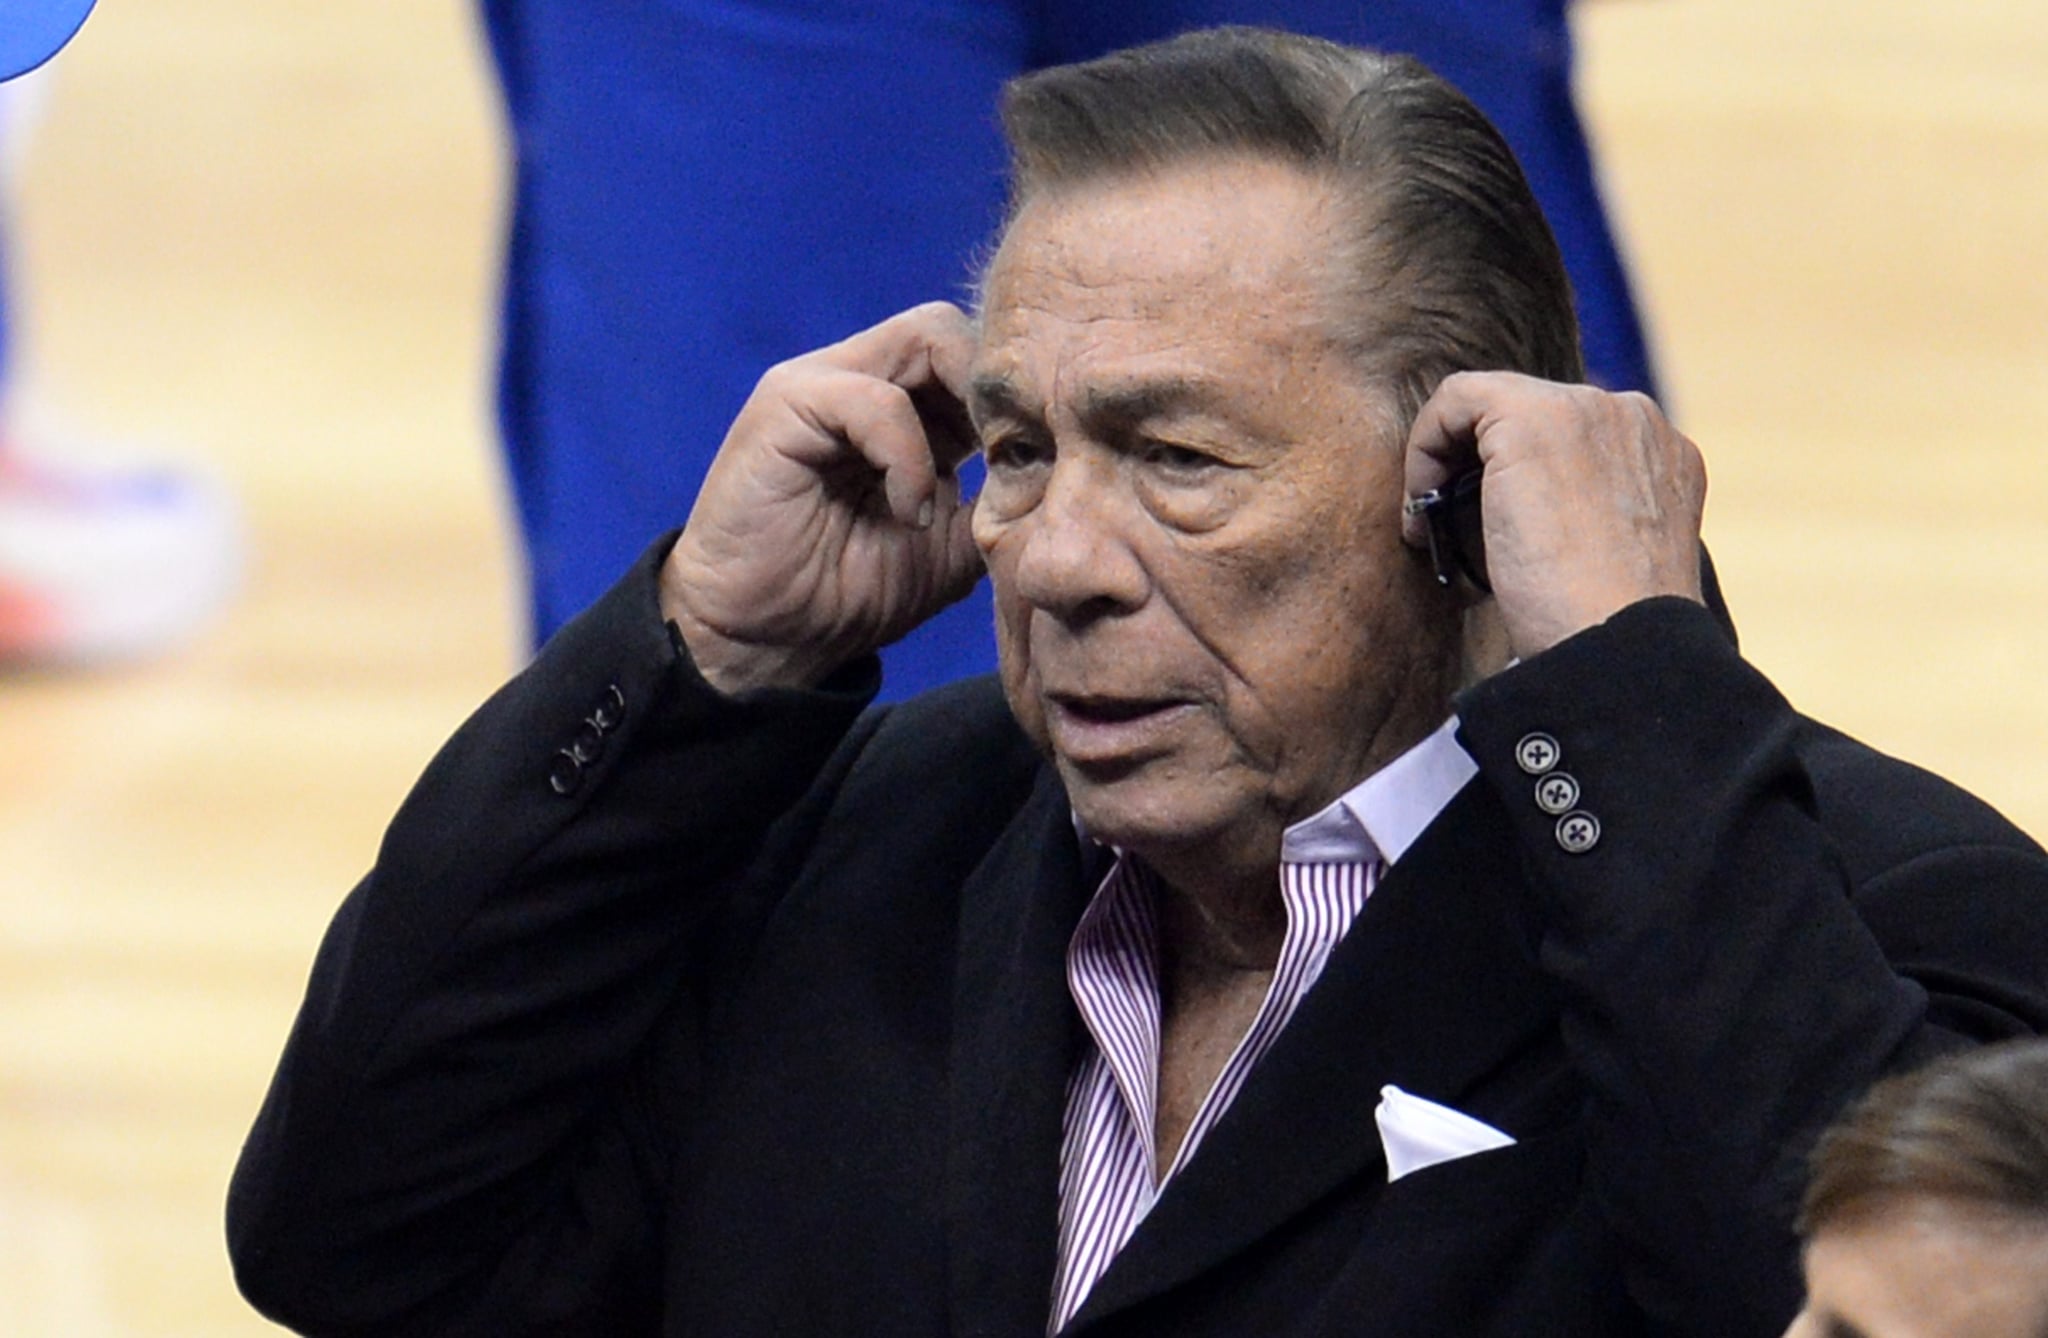 Los Angeles Clippers owner Donald Sterling attends the NBA playoff game between the Clippers and the Golden State Warriors, April 21, 2014 at Staples Centre in Los Angeles, California.  NBA Commissioner Adam Silver said April 26 that the NBA is investigating Sterling for alleged racist comments. AFP PHOTO / ROBYN BECK        (Photo credit should read ROBYN BECK/AFP via Getty Images)